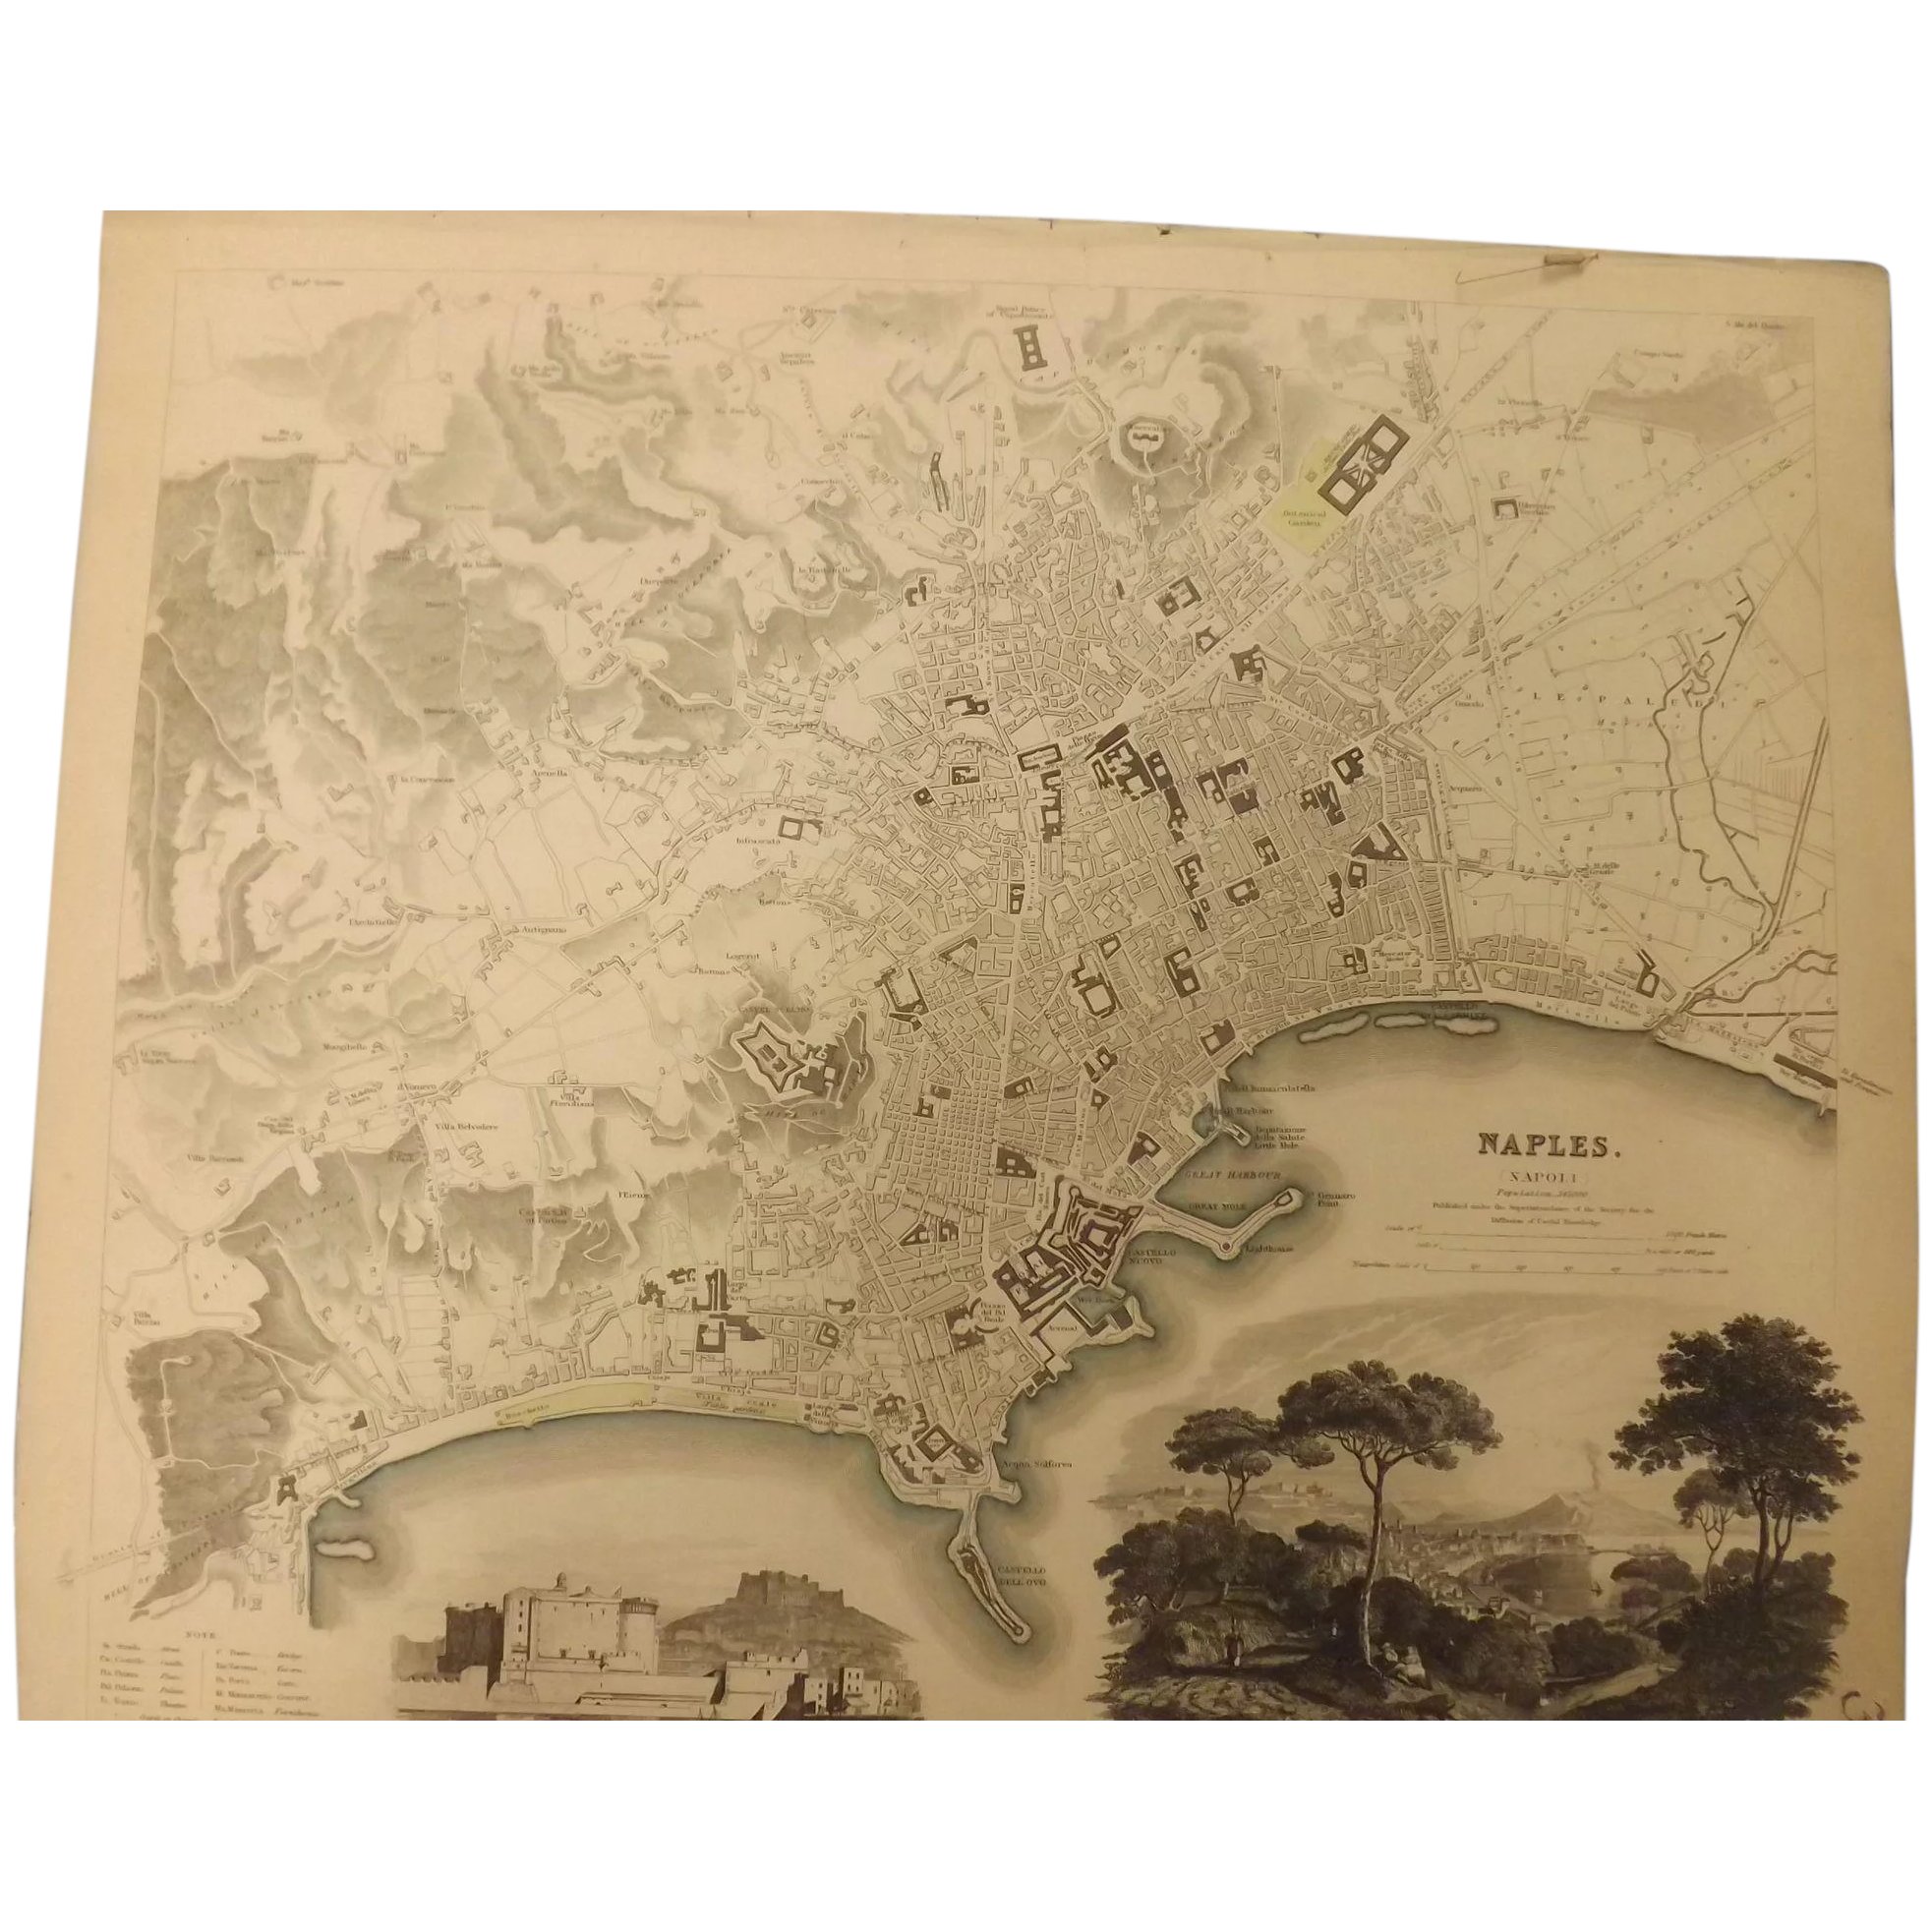 An Original Atlas Map of NAPLES circa 1835 Published By 